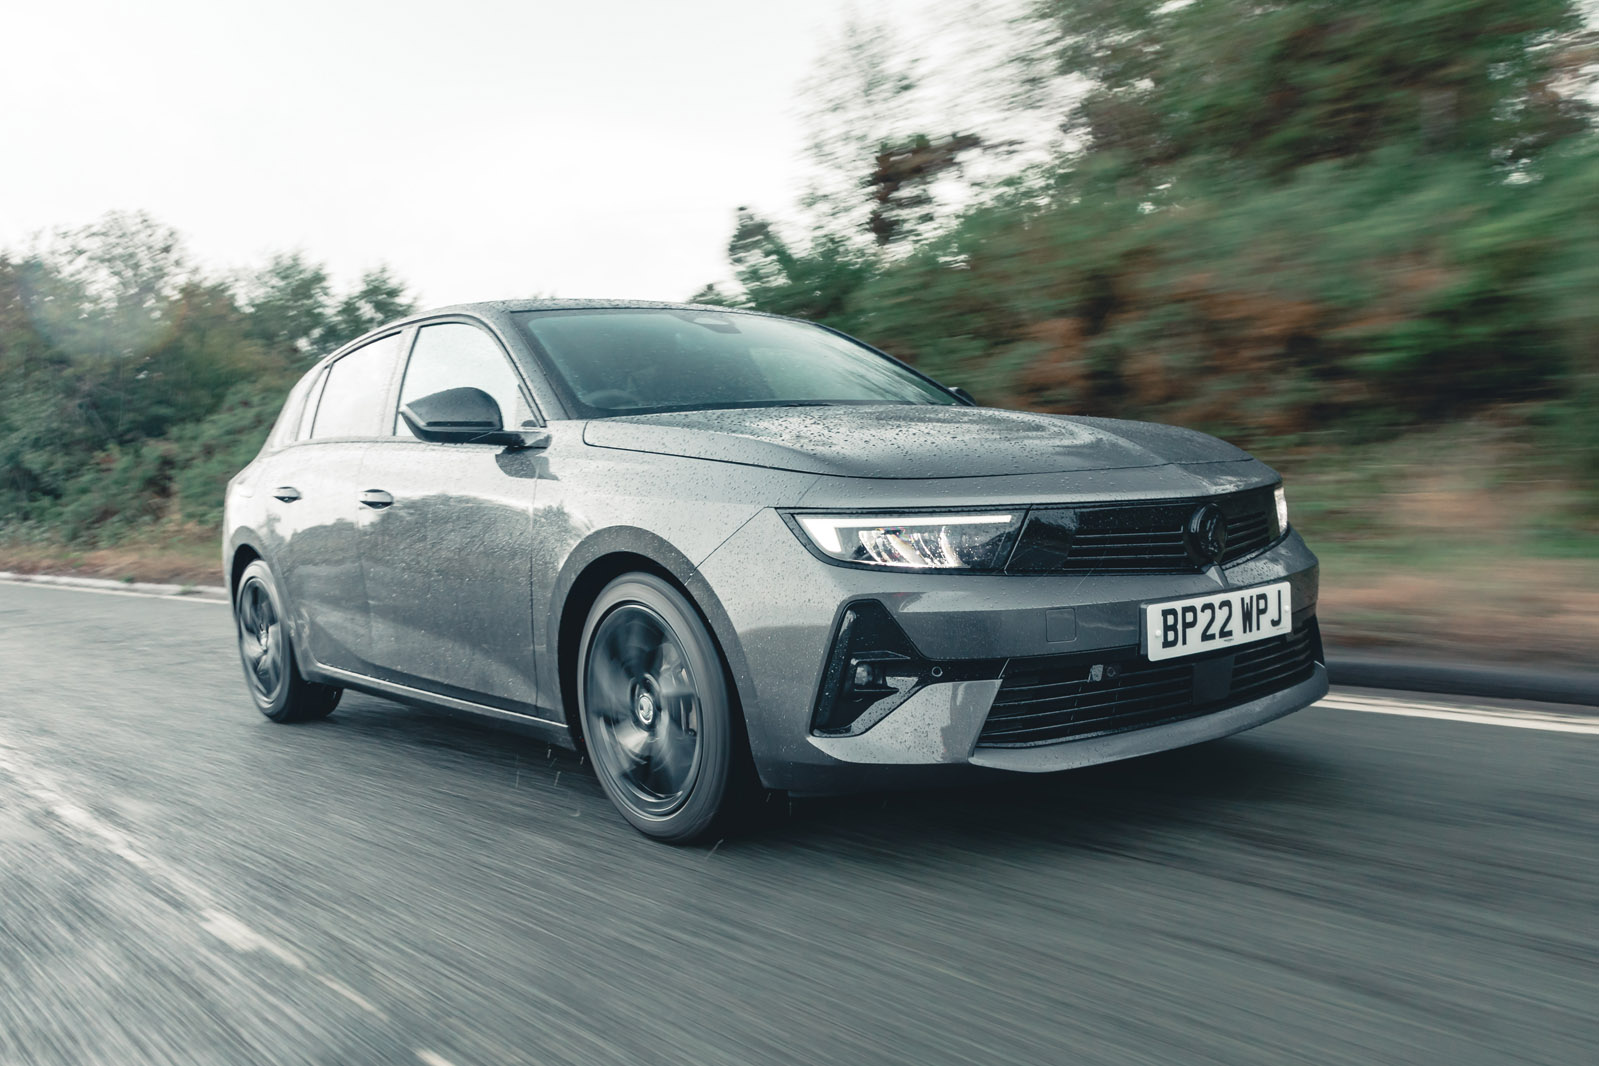 The Vauxhall Astra J stands the test of time 